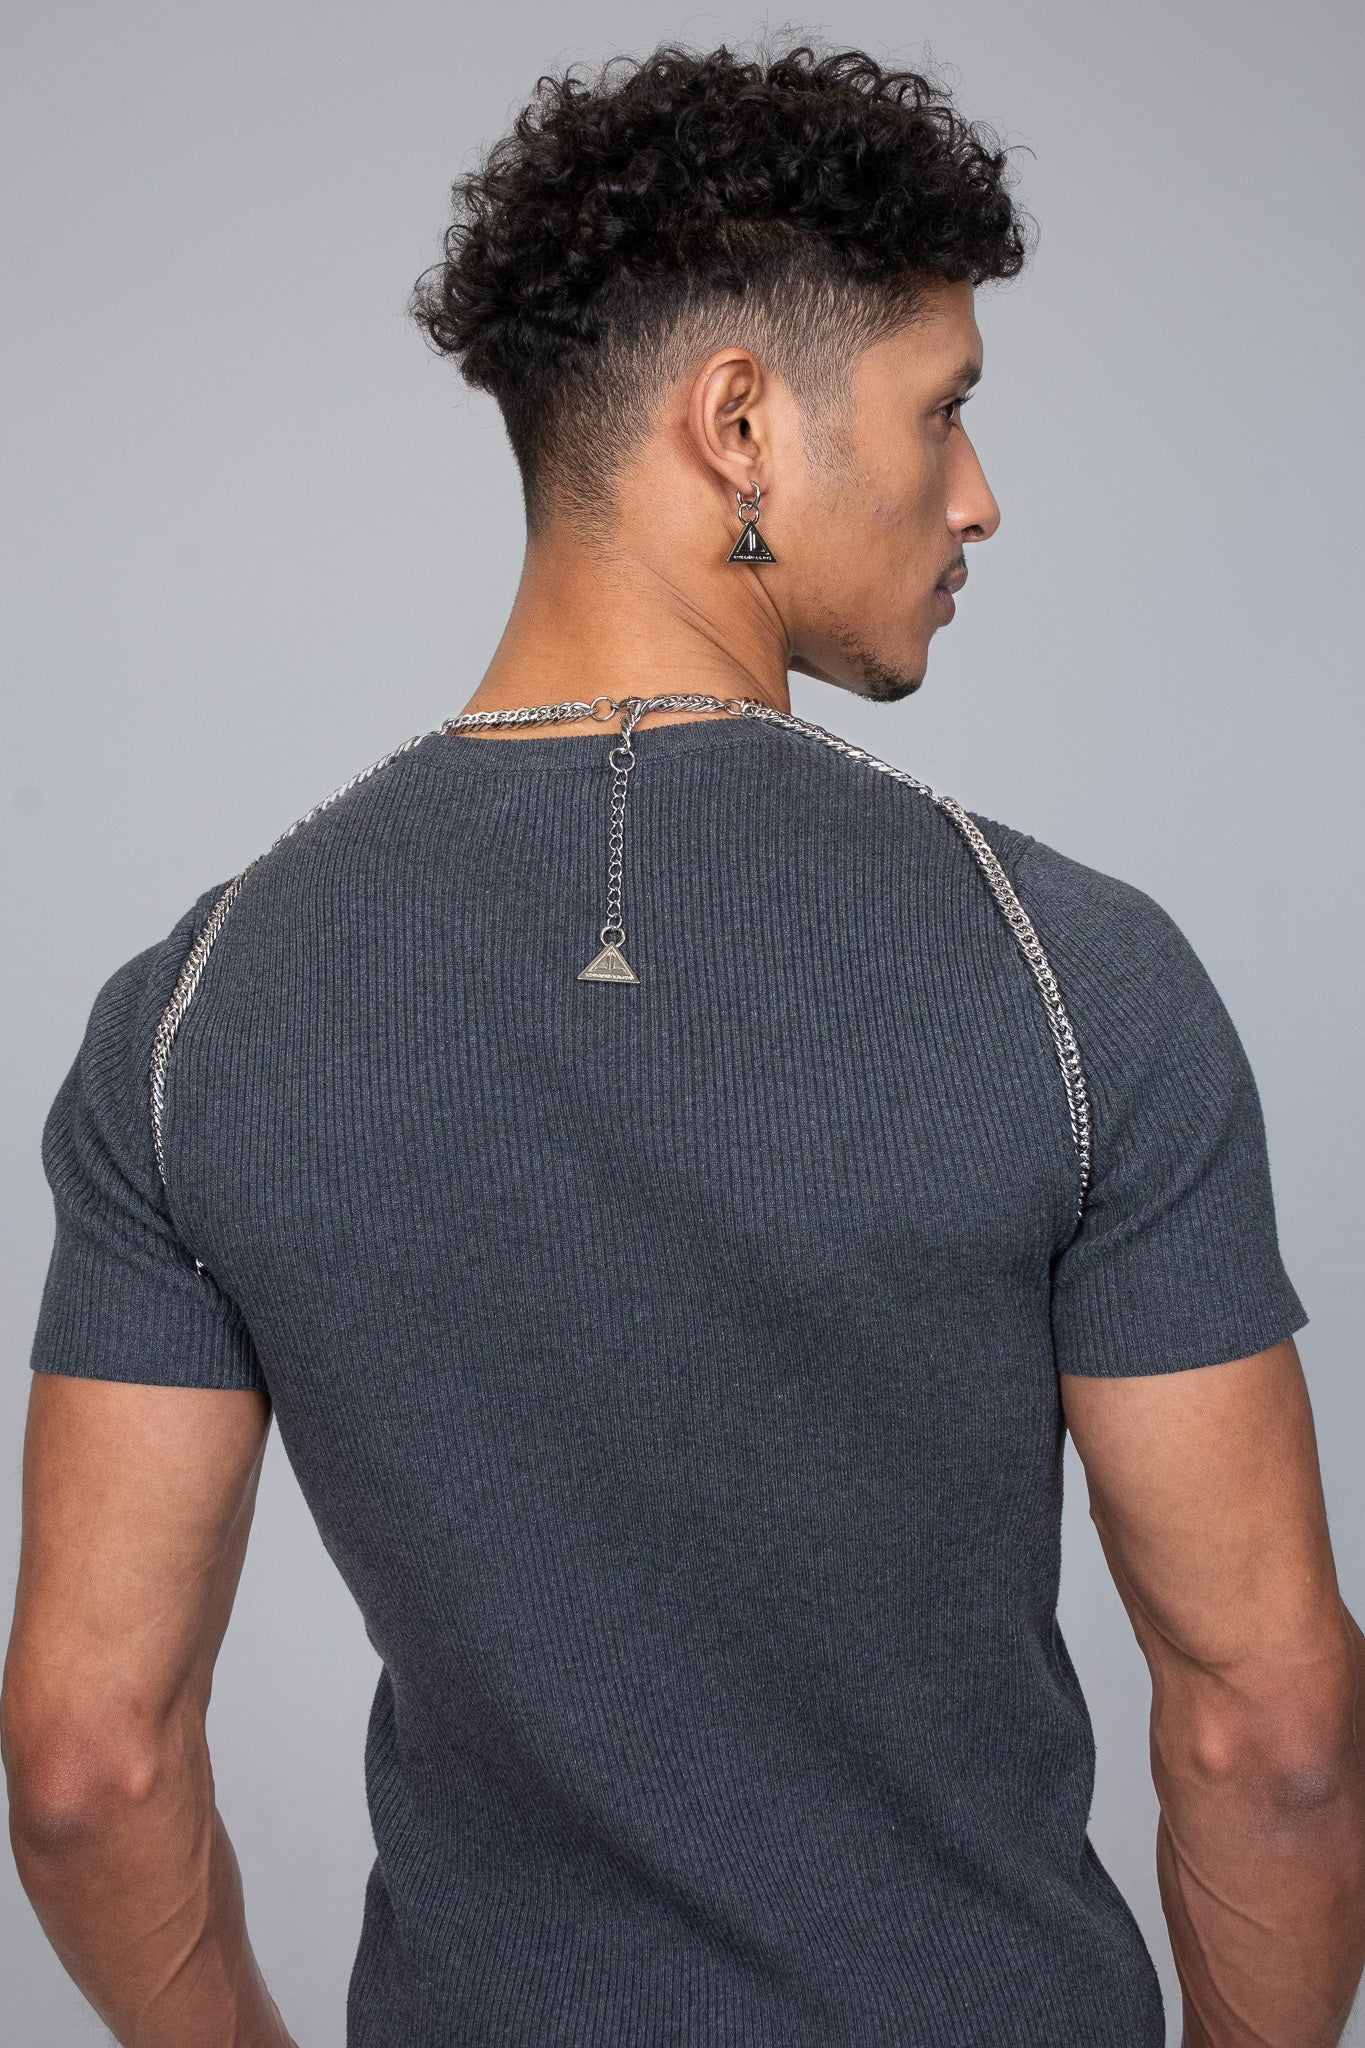 The picture shows that the body chain accessory made by the fashion brand Lorand Lajos also looks fashionable, modern and chique from the back.